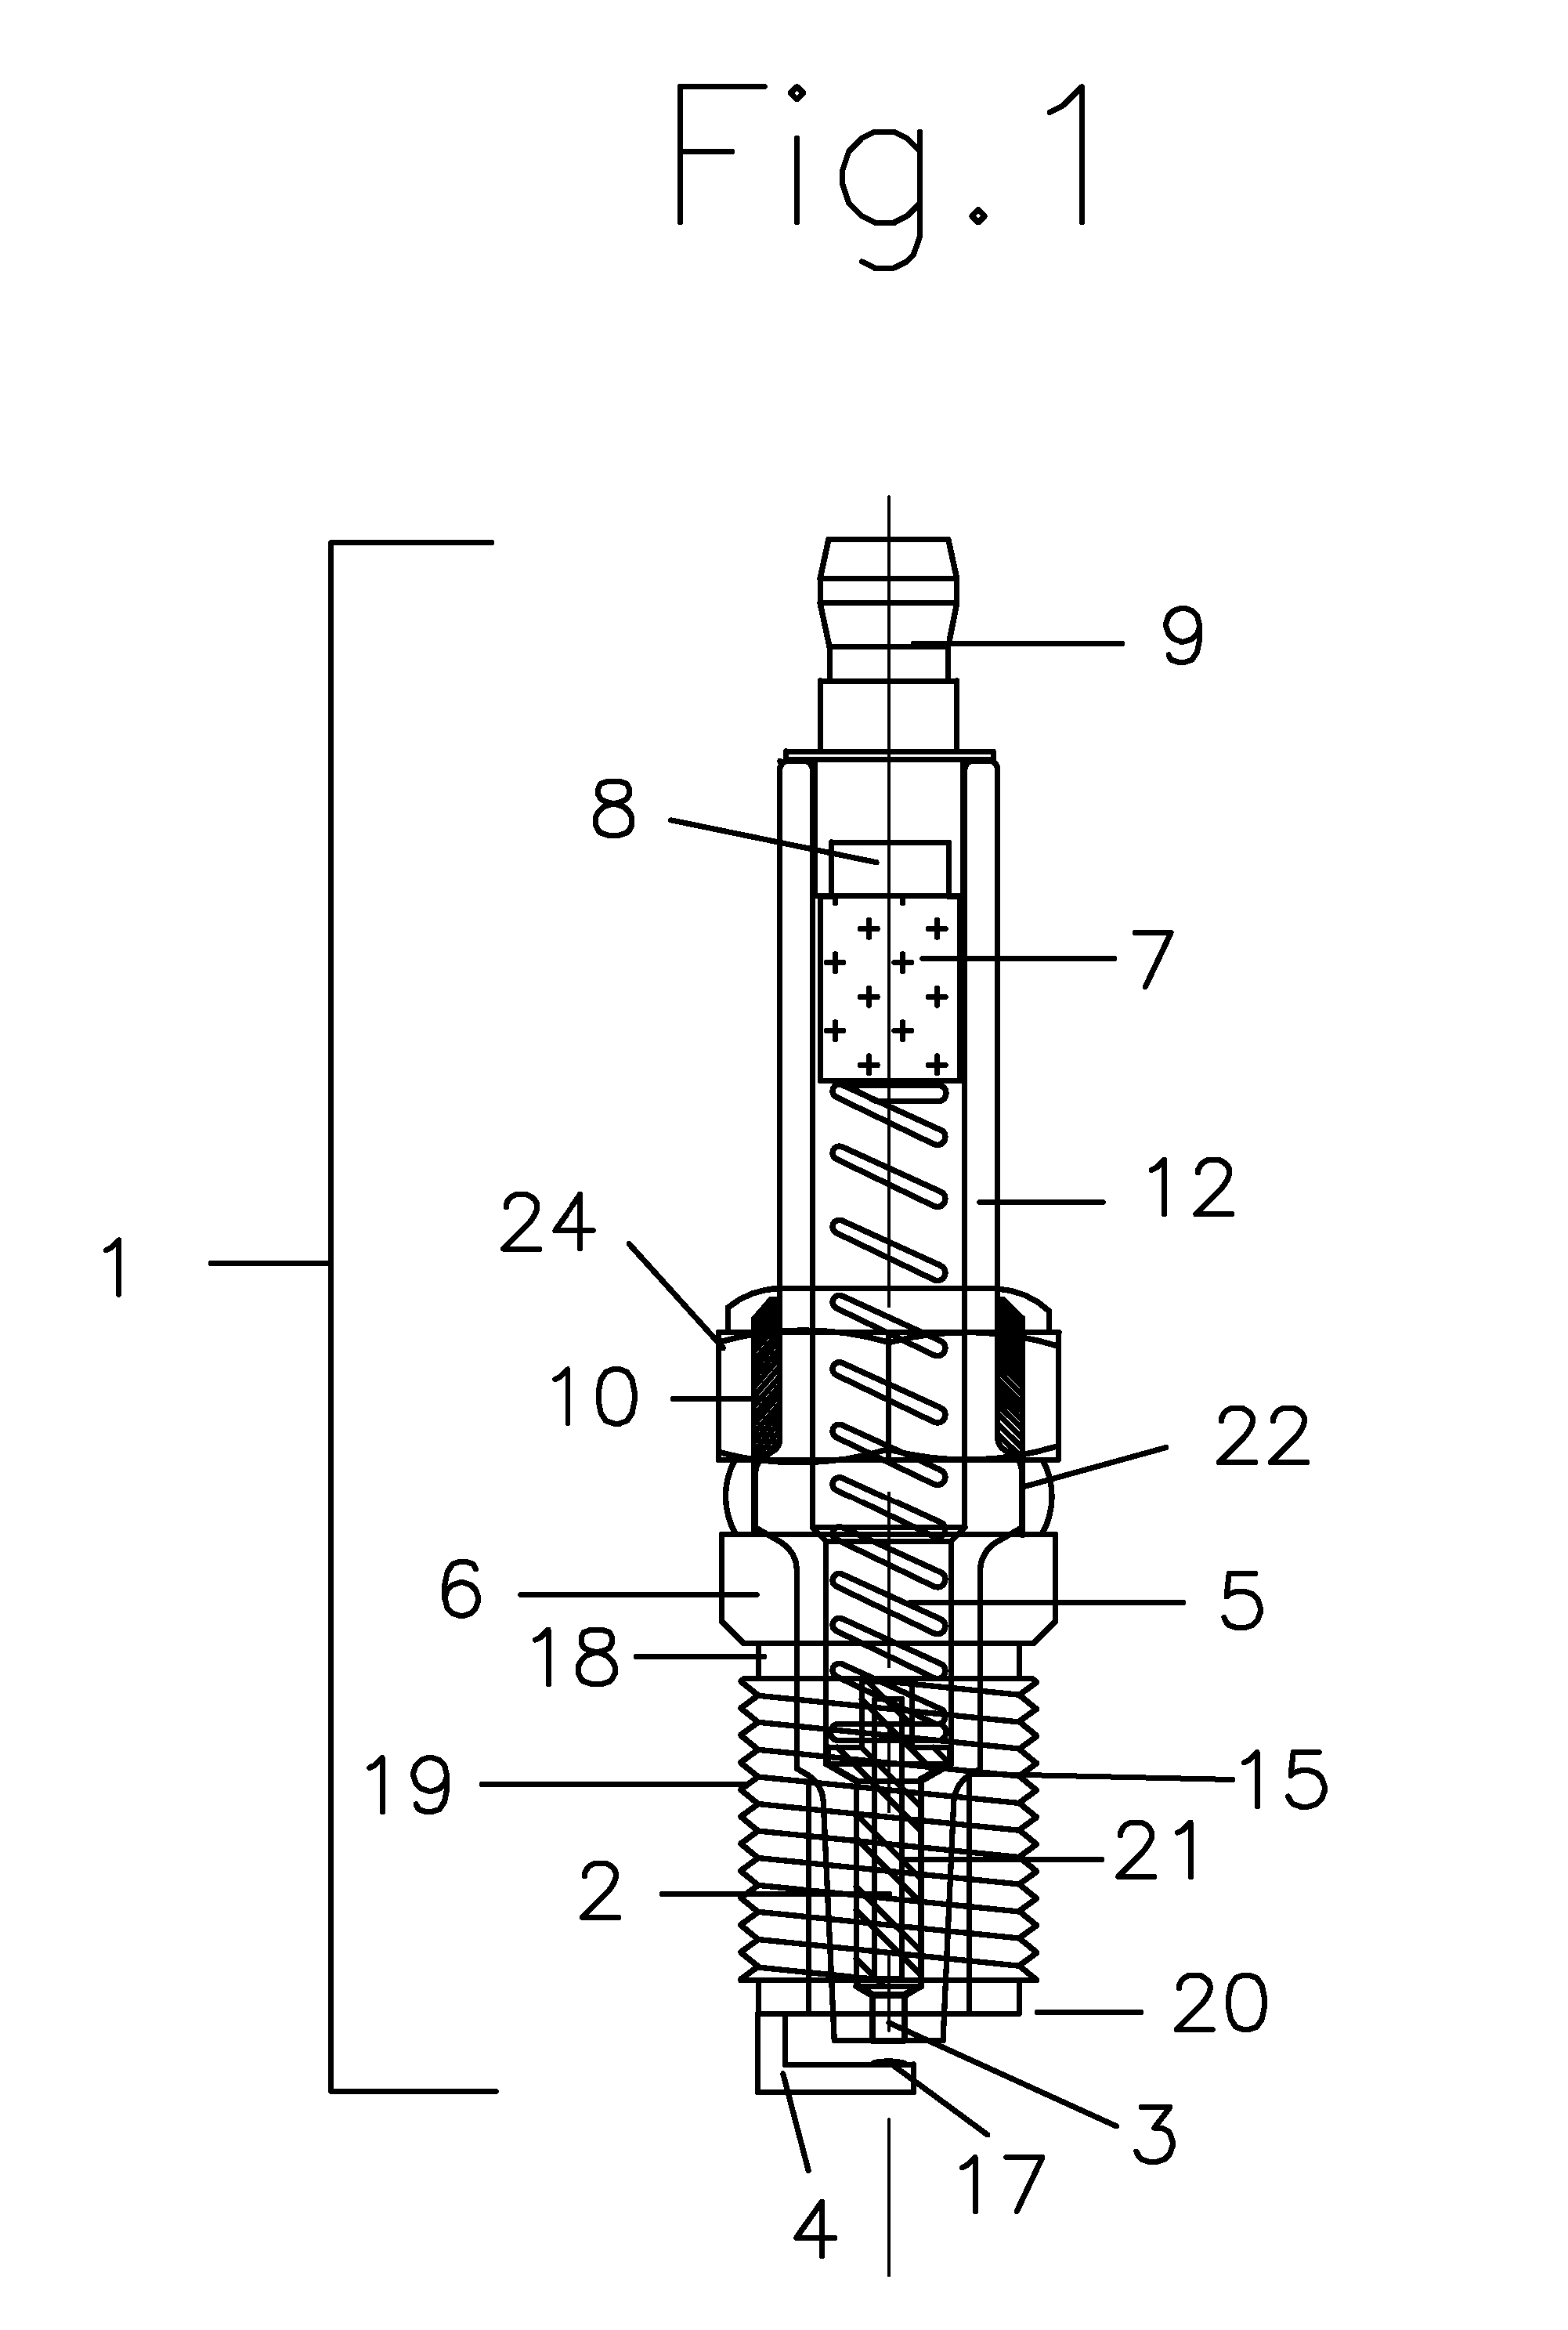 High power discharge fuel ignitor